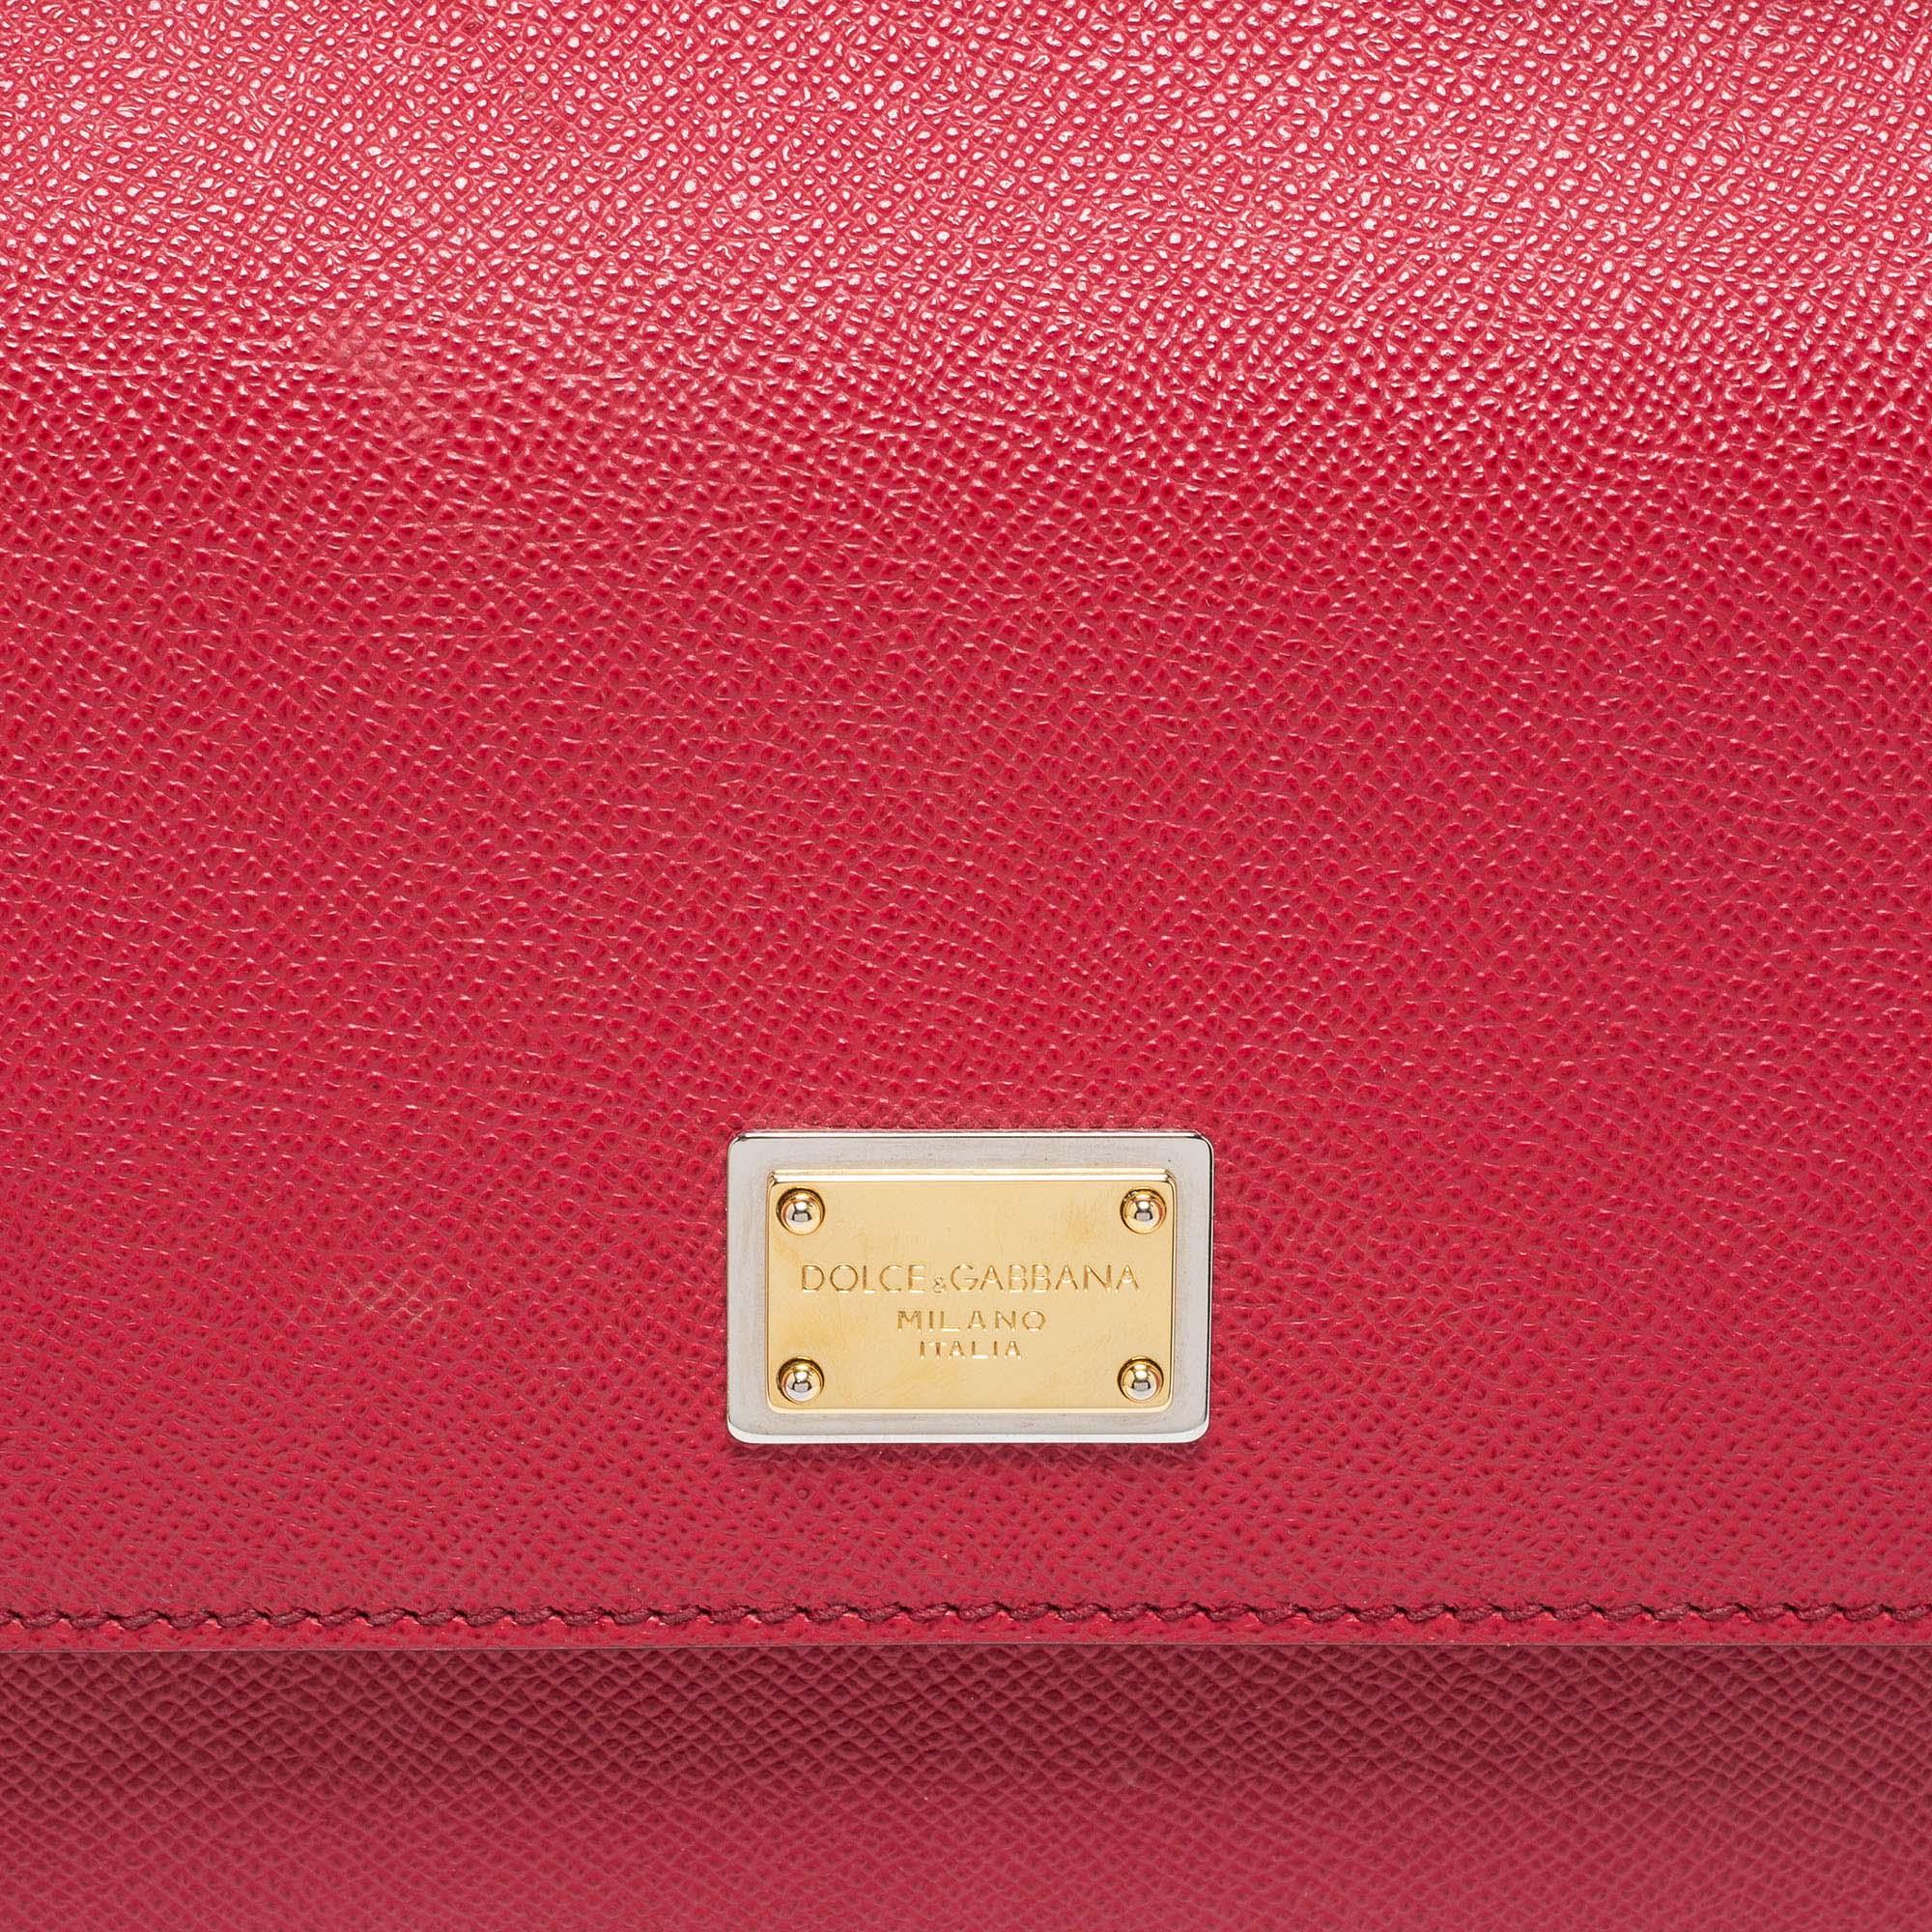 Dolce & Gabbana Red Leather Medium Miss Sicily Tote 7